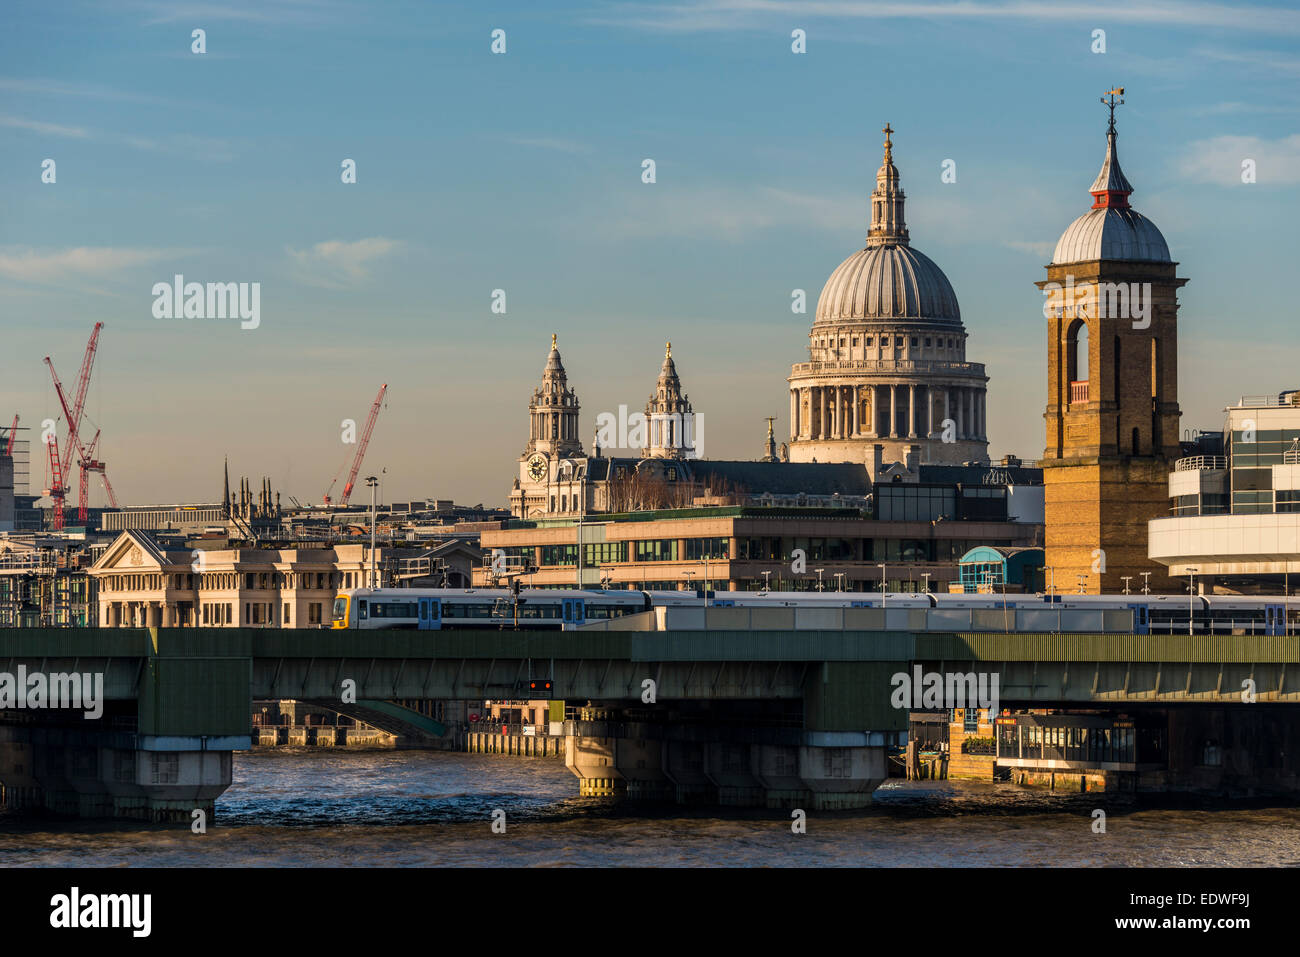 View across the River Thames to cannon Street rail station and St Paul's Cathedral Stock Photo